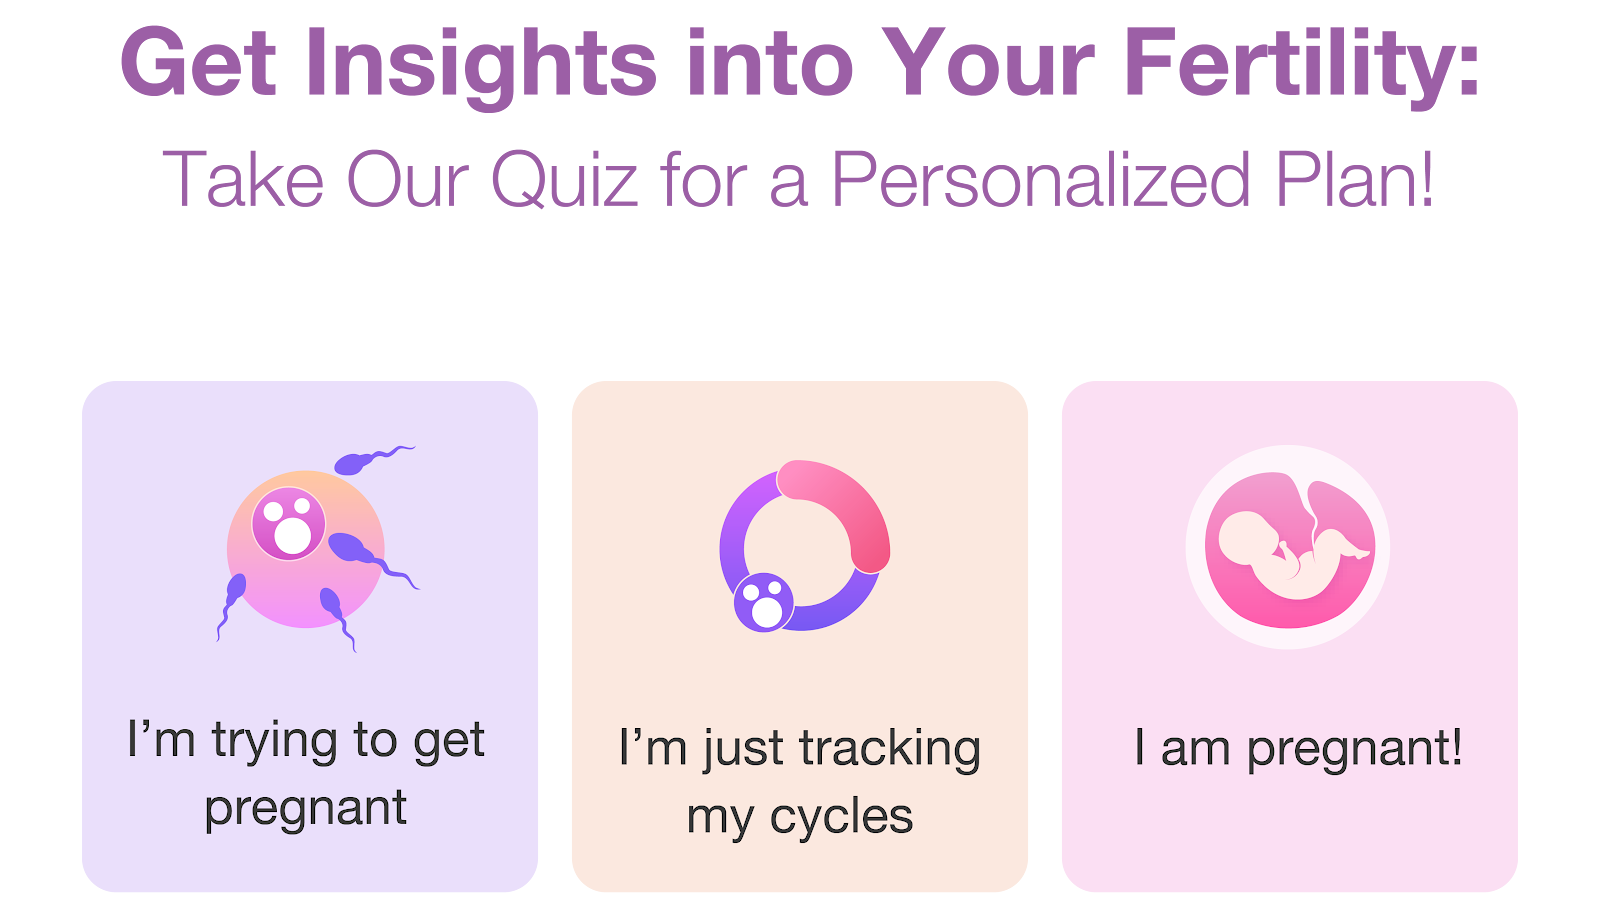 Get Insights into Your Fertility